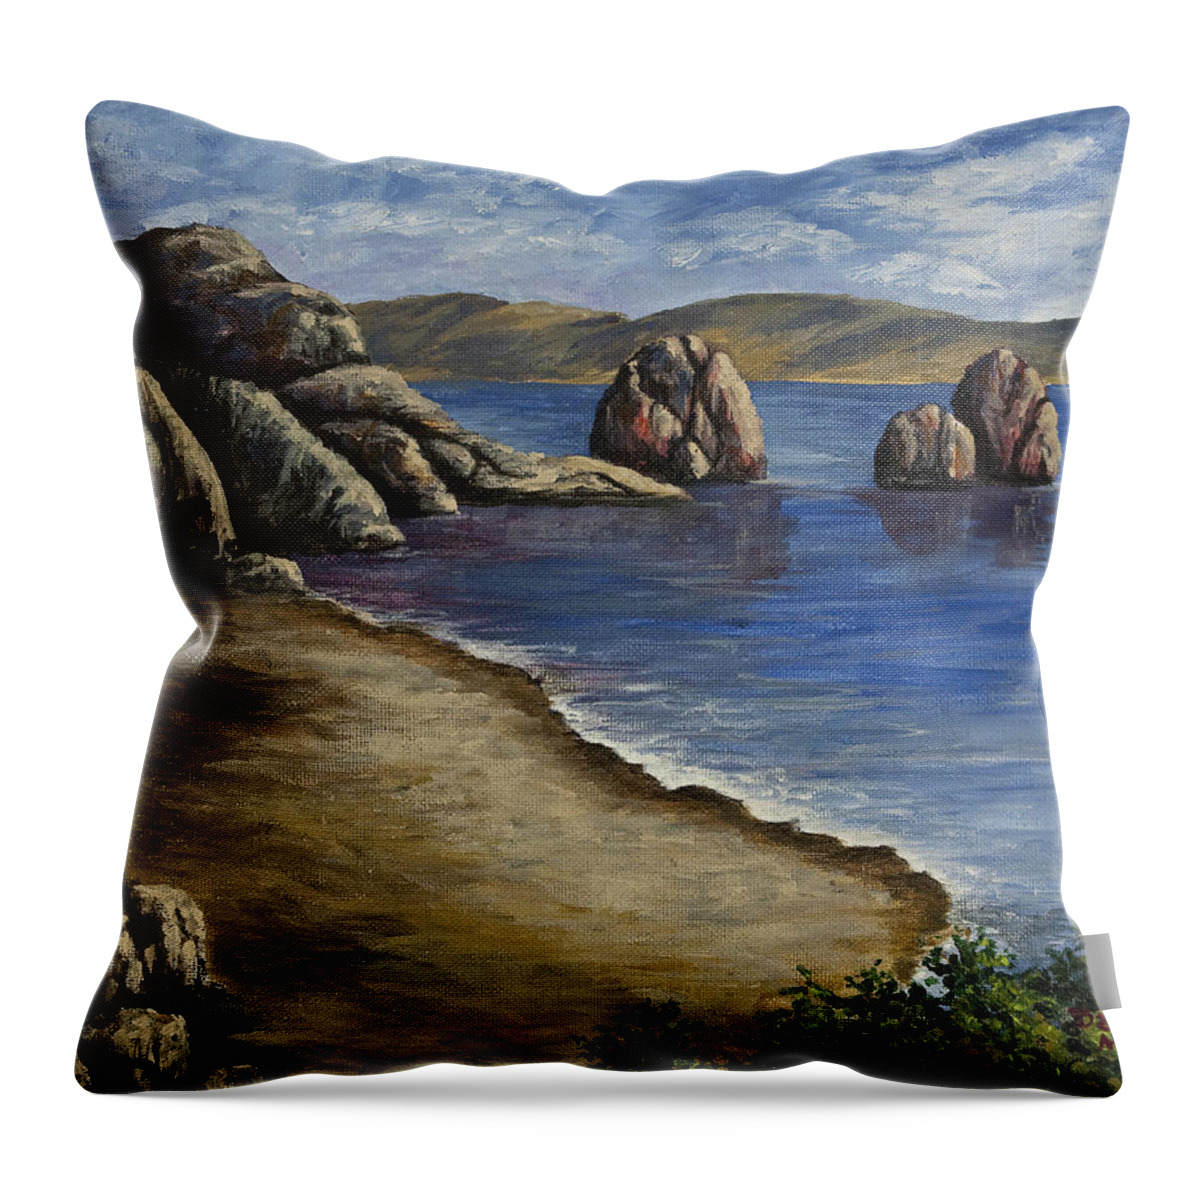 Ocean Throw Pillow featuring the painting Rocky Shore by Darice Machel McGuire